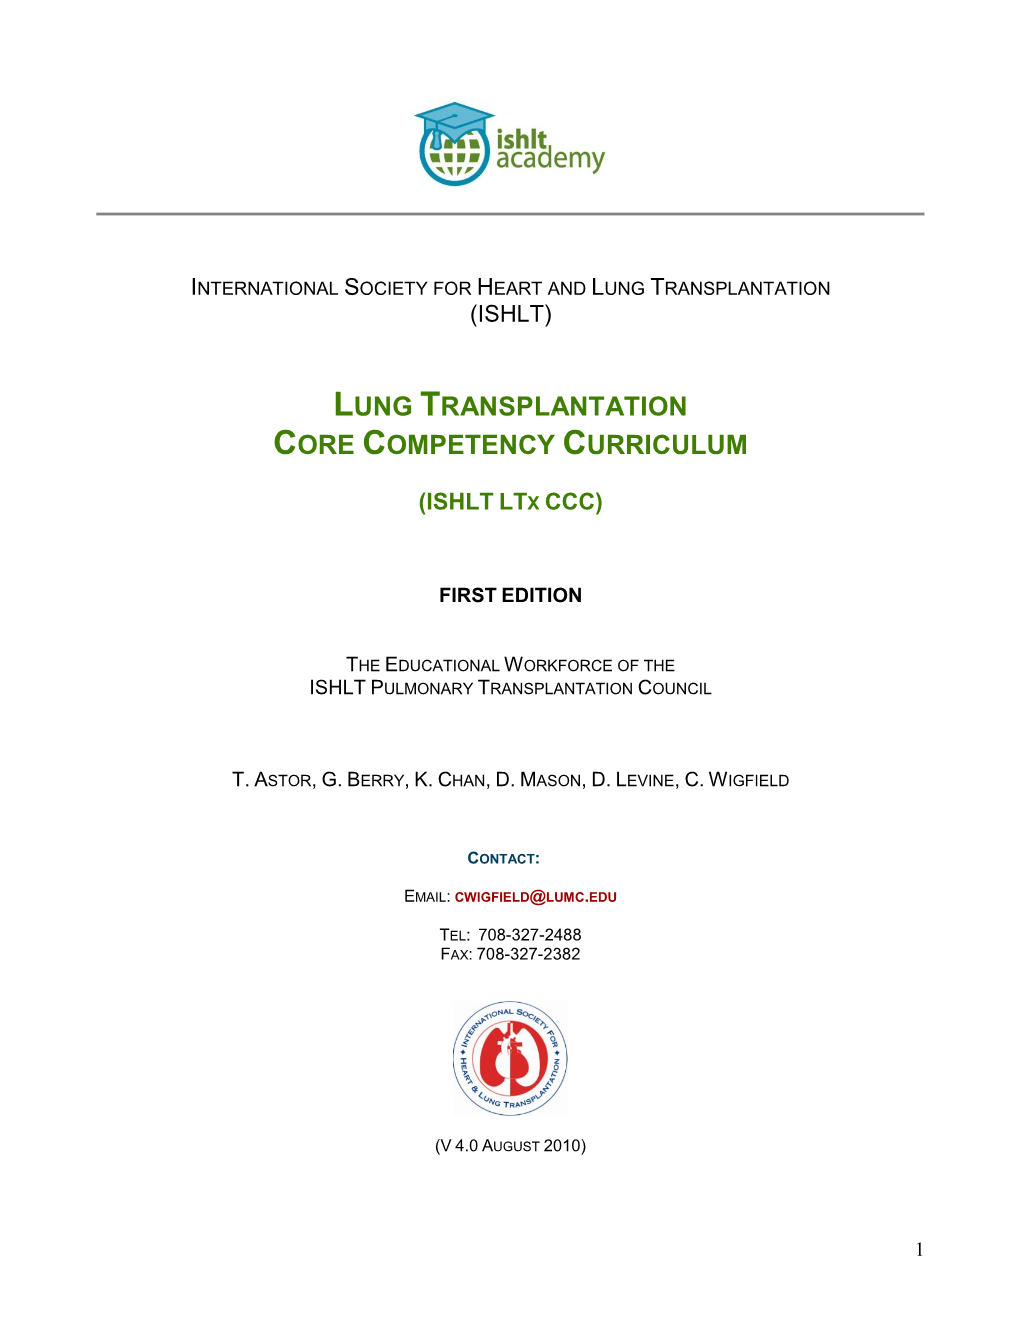 Lung Transplantation Core Competency Curriculum